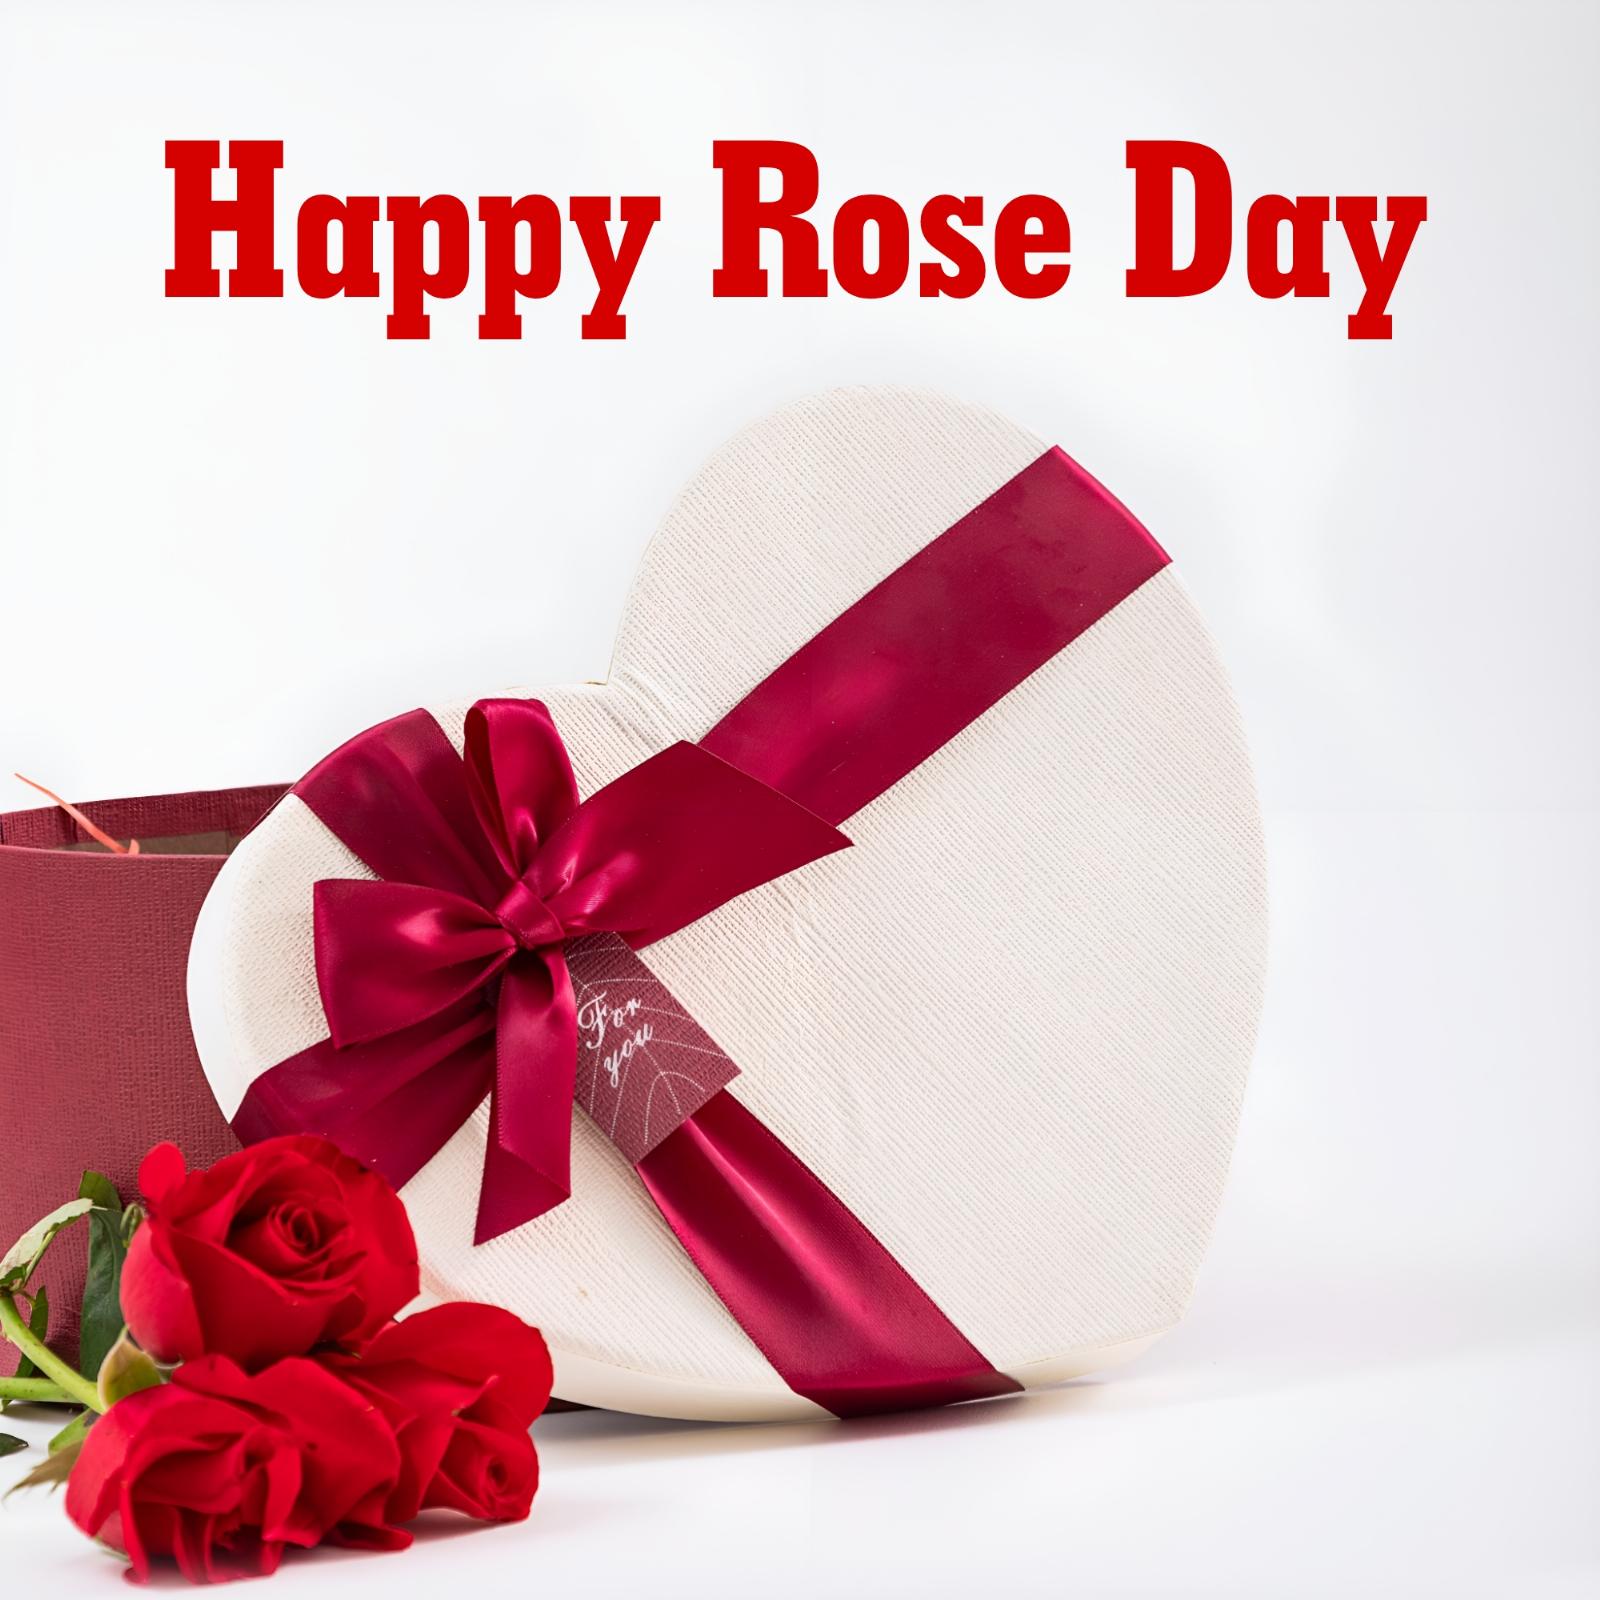 Romantic Happy Rose Day Images